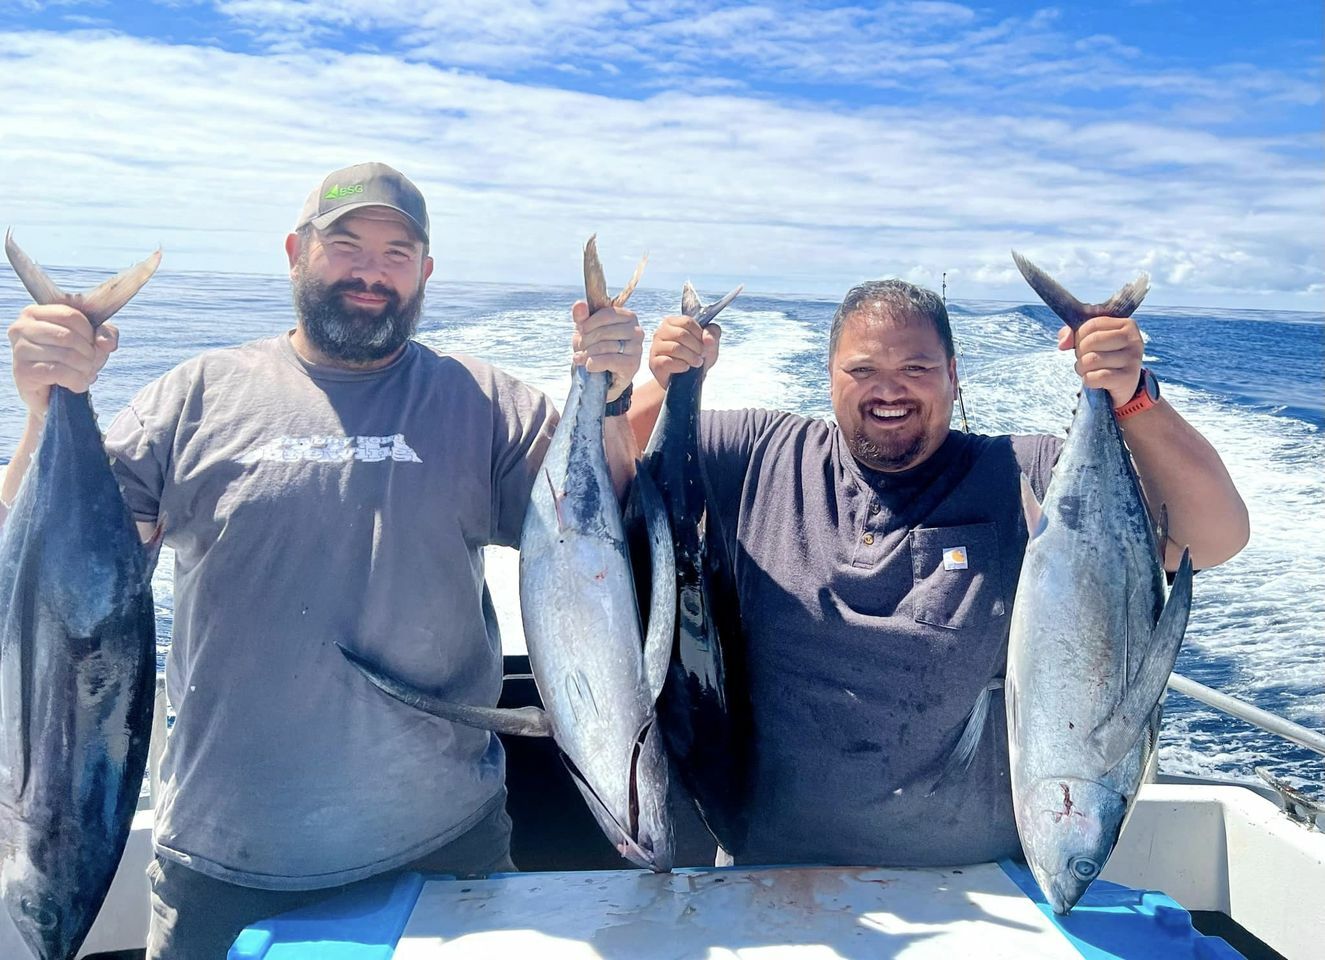 Another great day tuna fishing on the Sudsy!